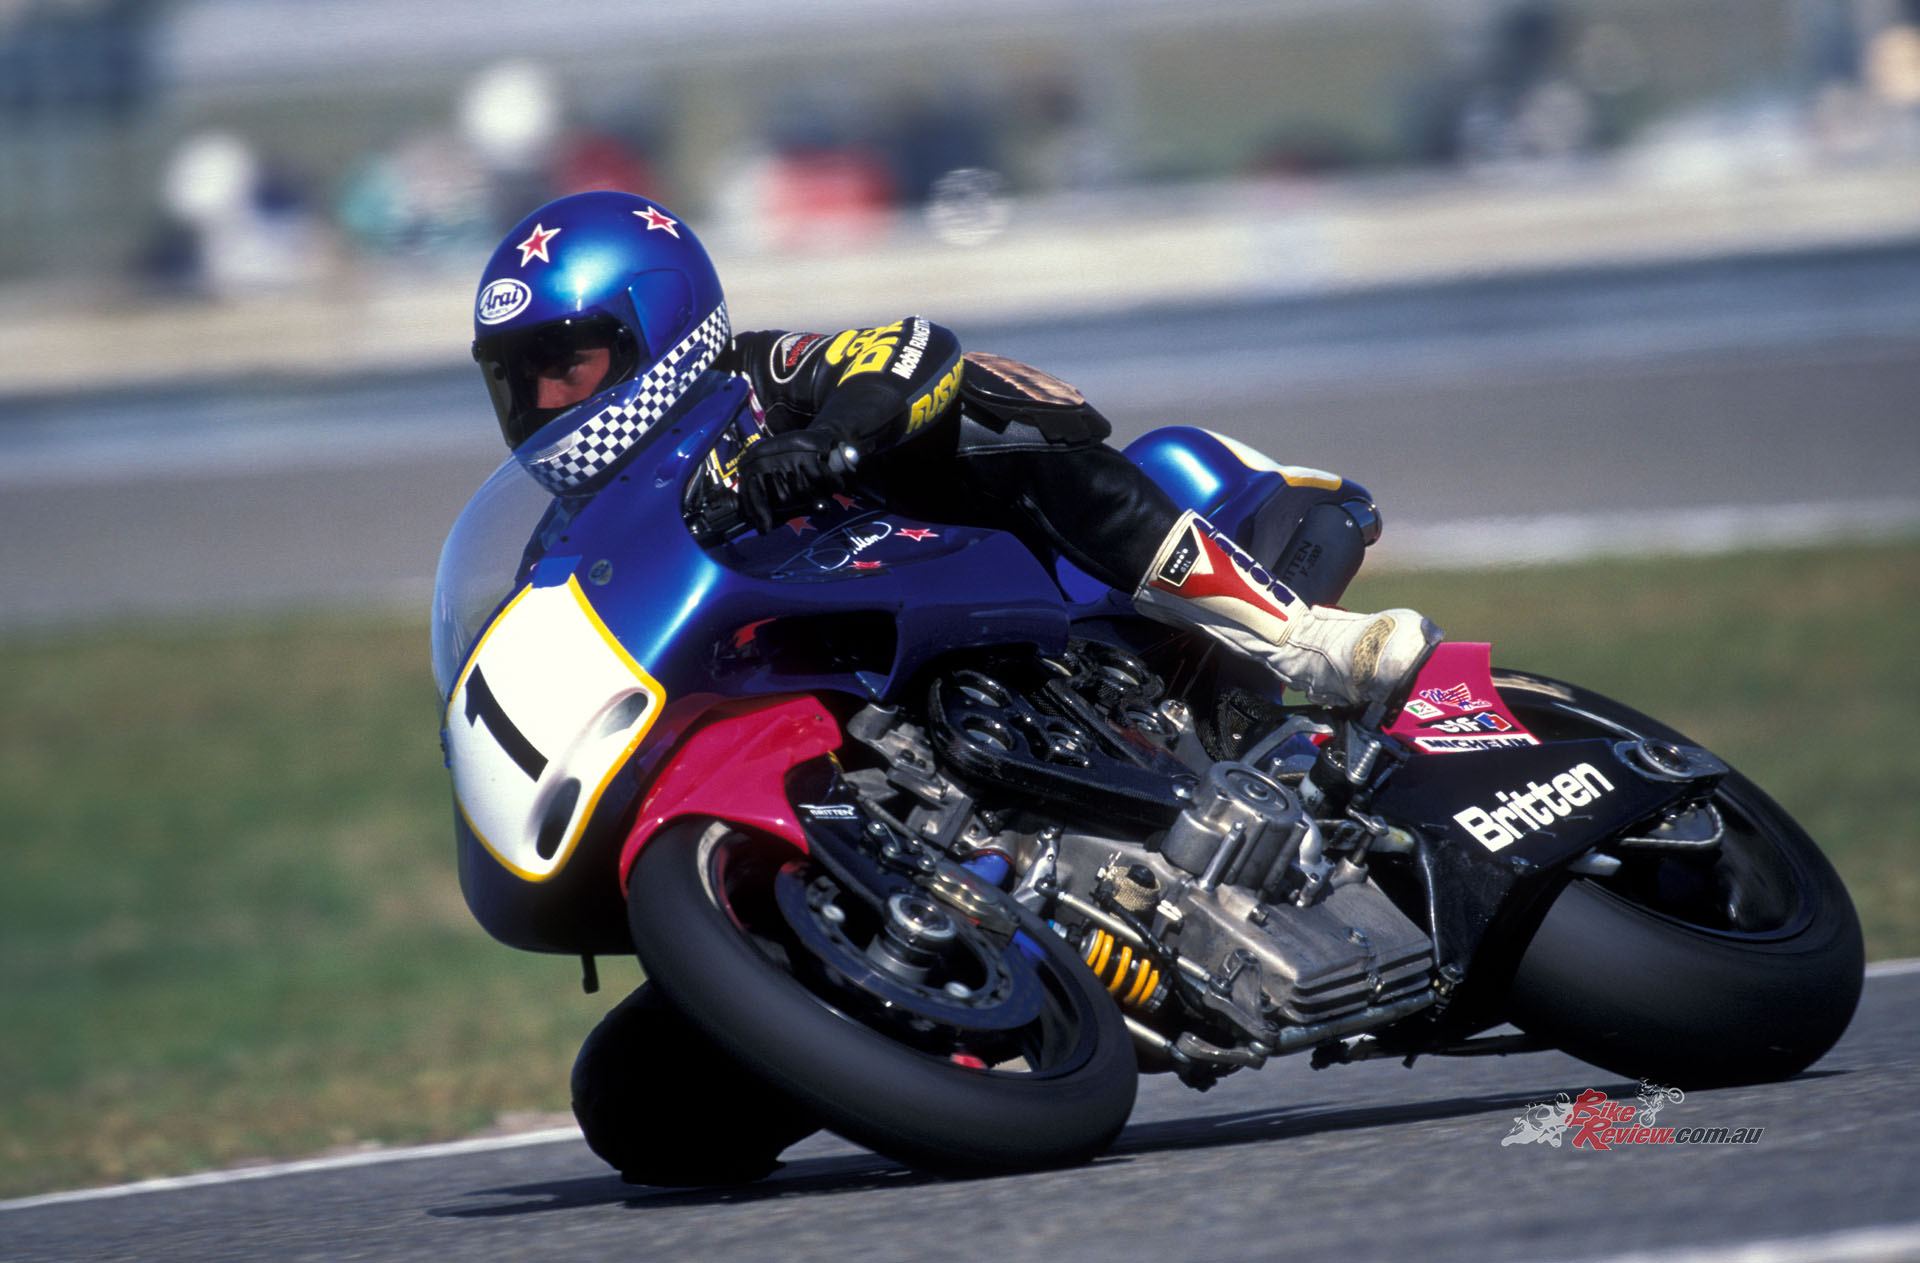 John was obviously one of the early innovators of things like carbon-fibre and unconventional suspension setups. 